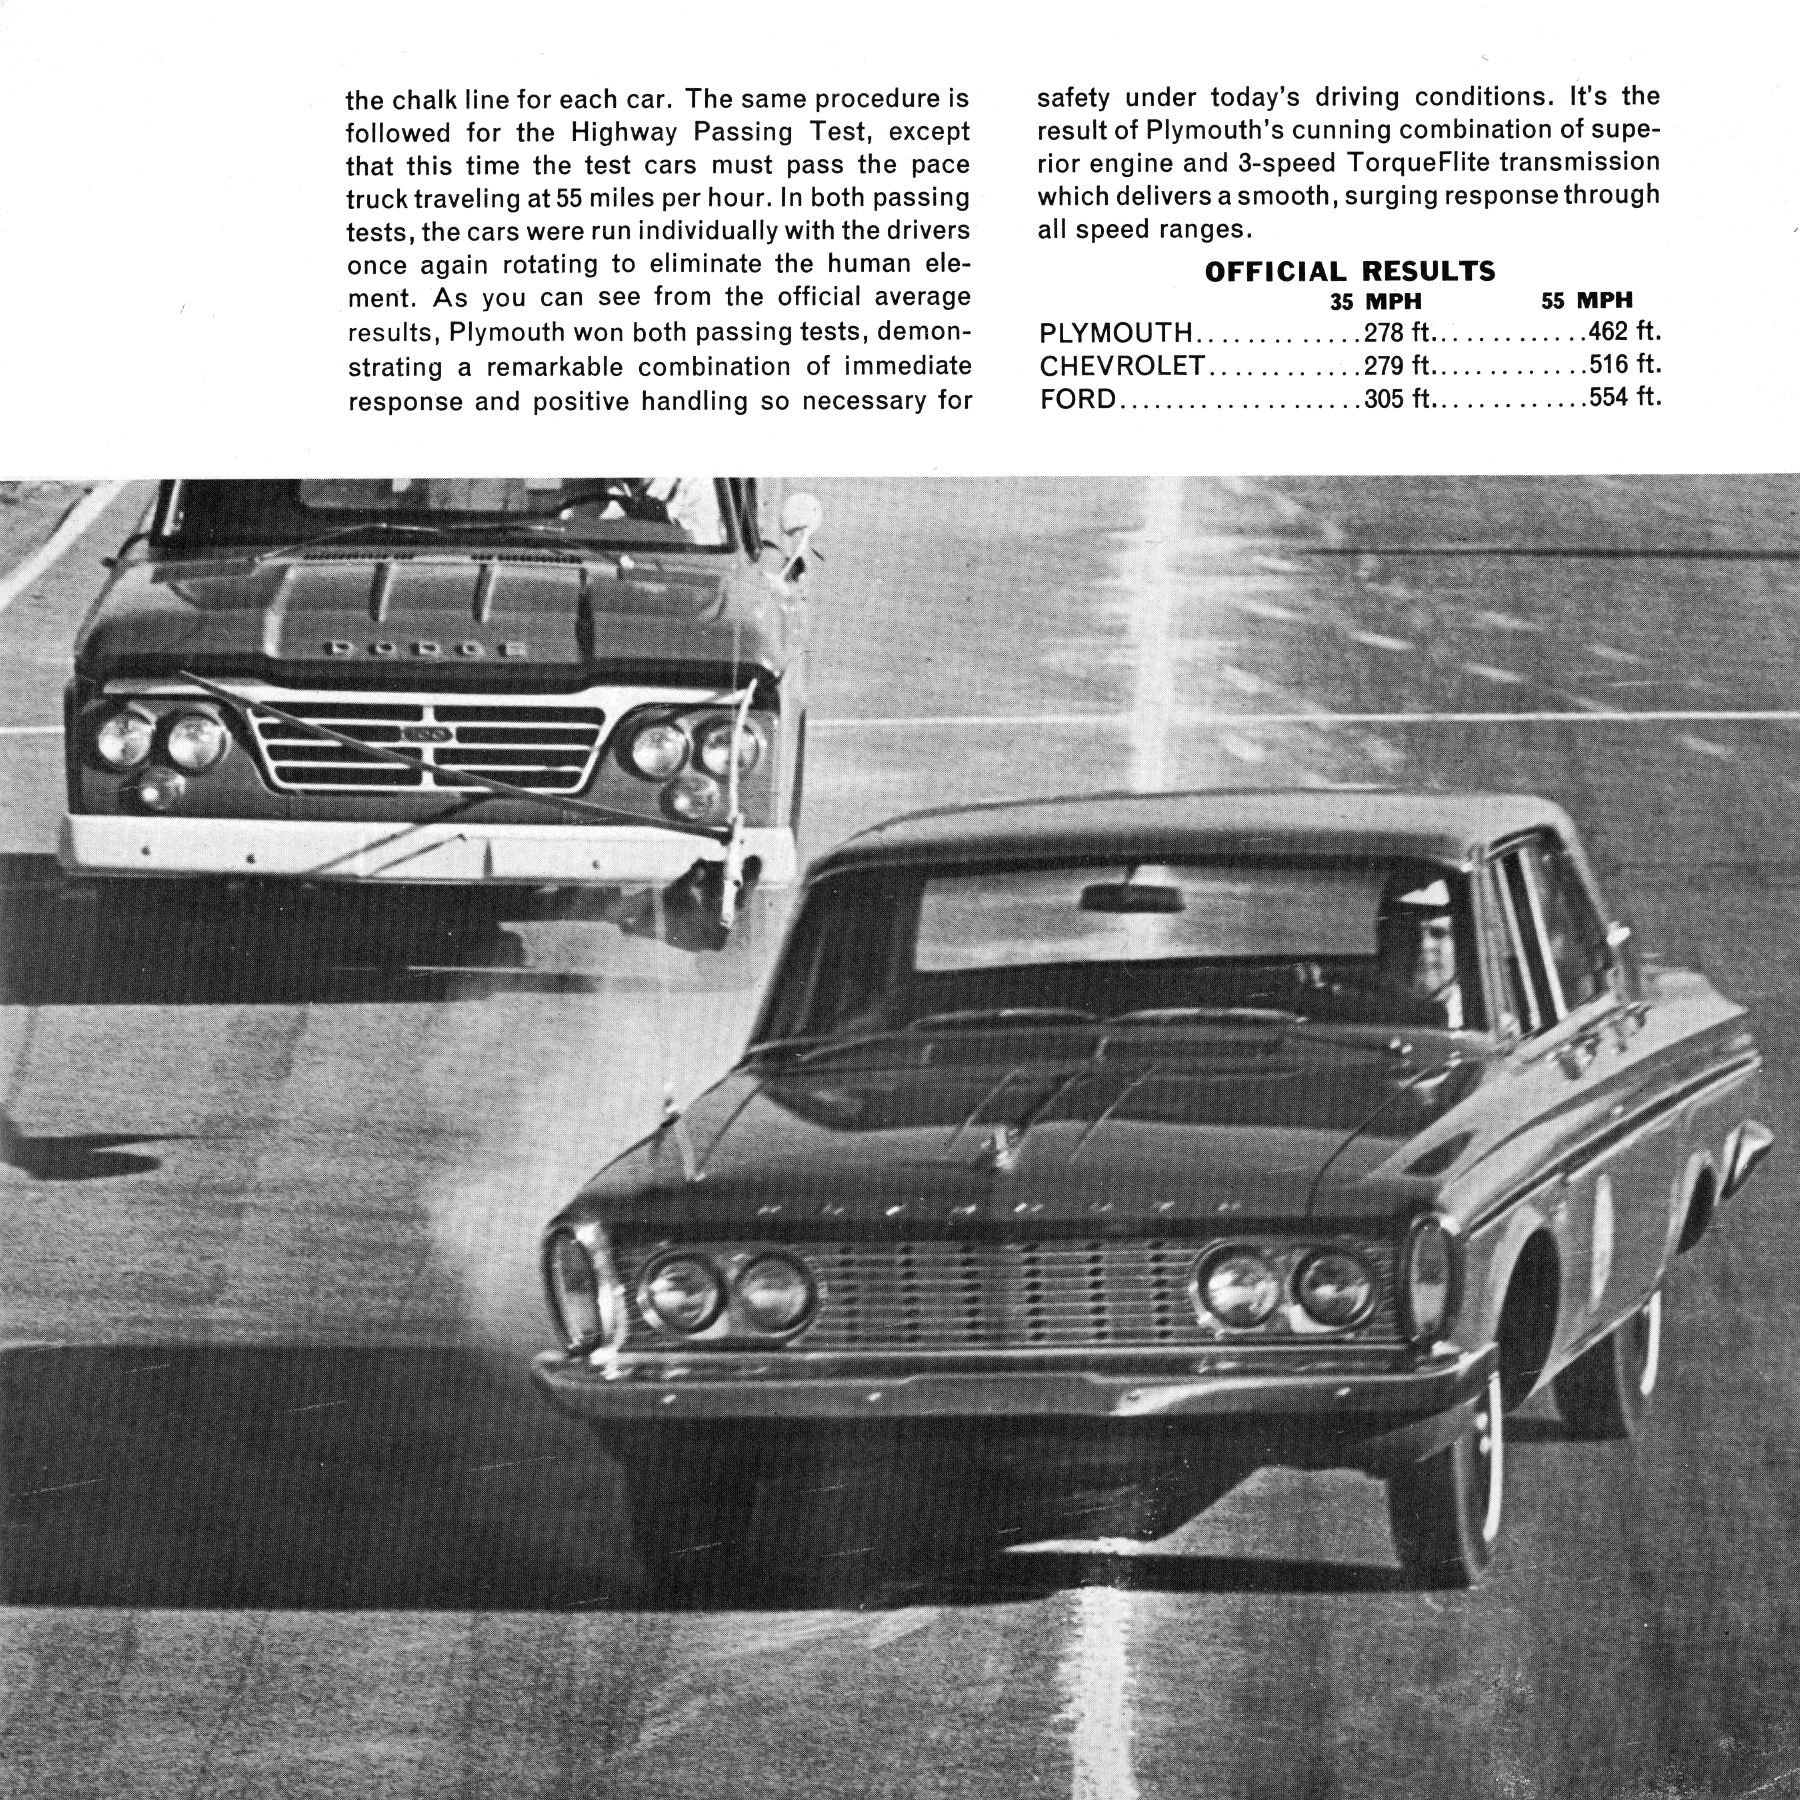 1963_Plymouth_Riverside_Results-07